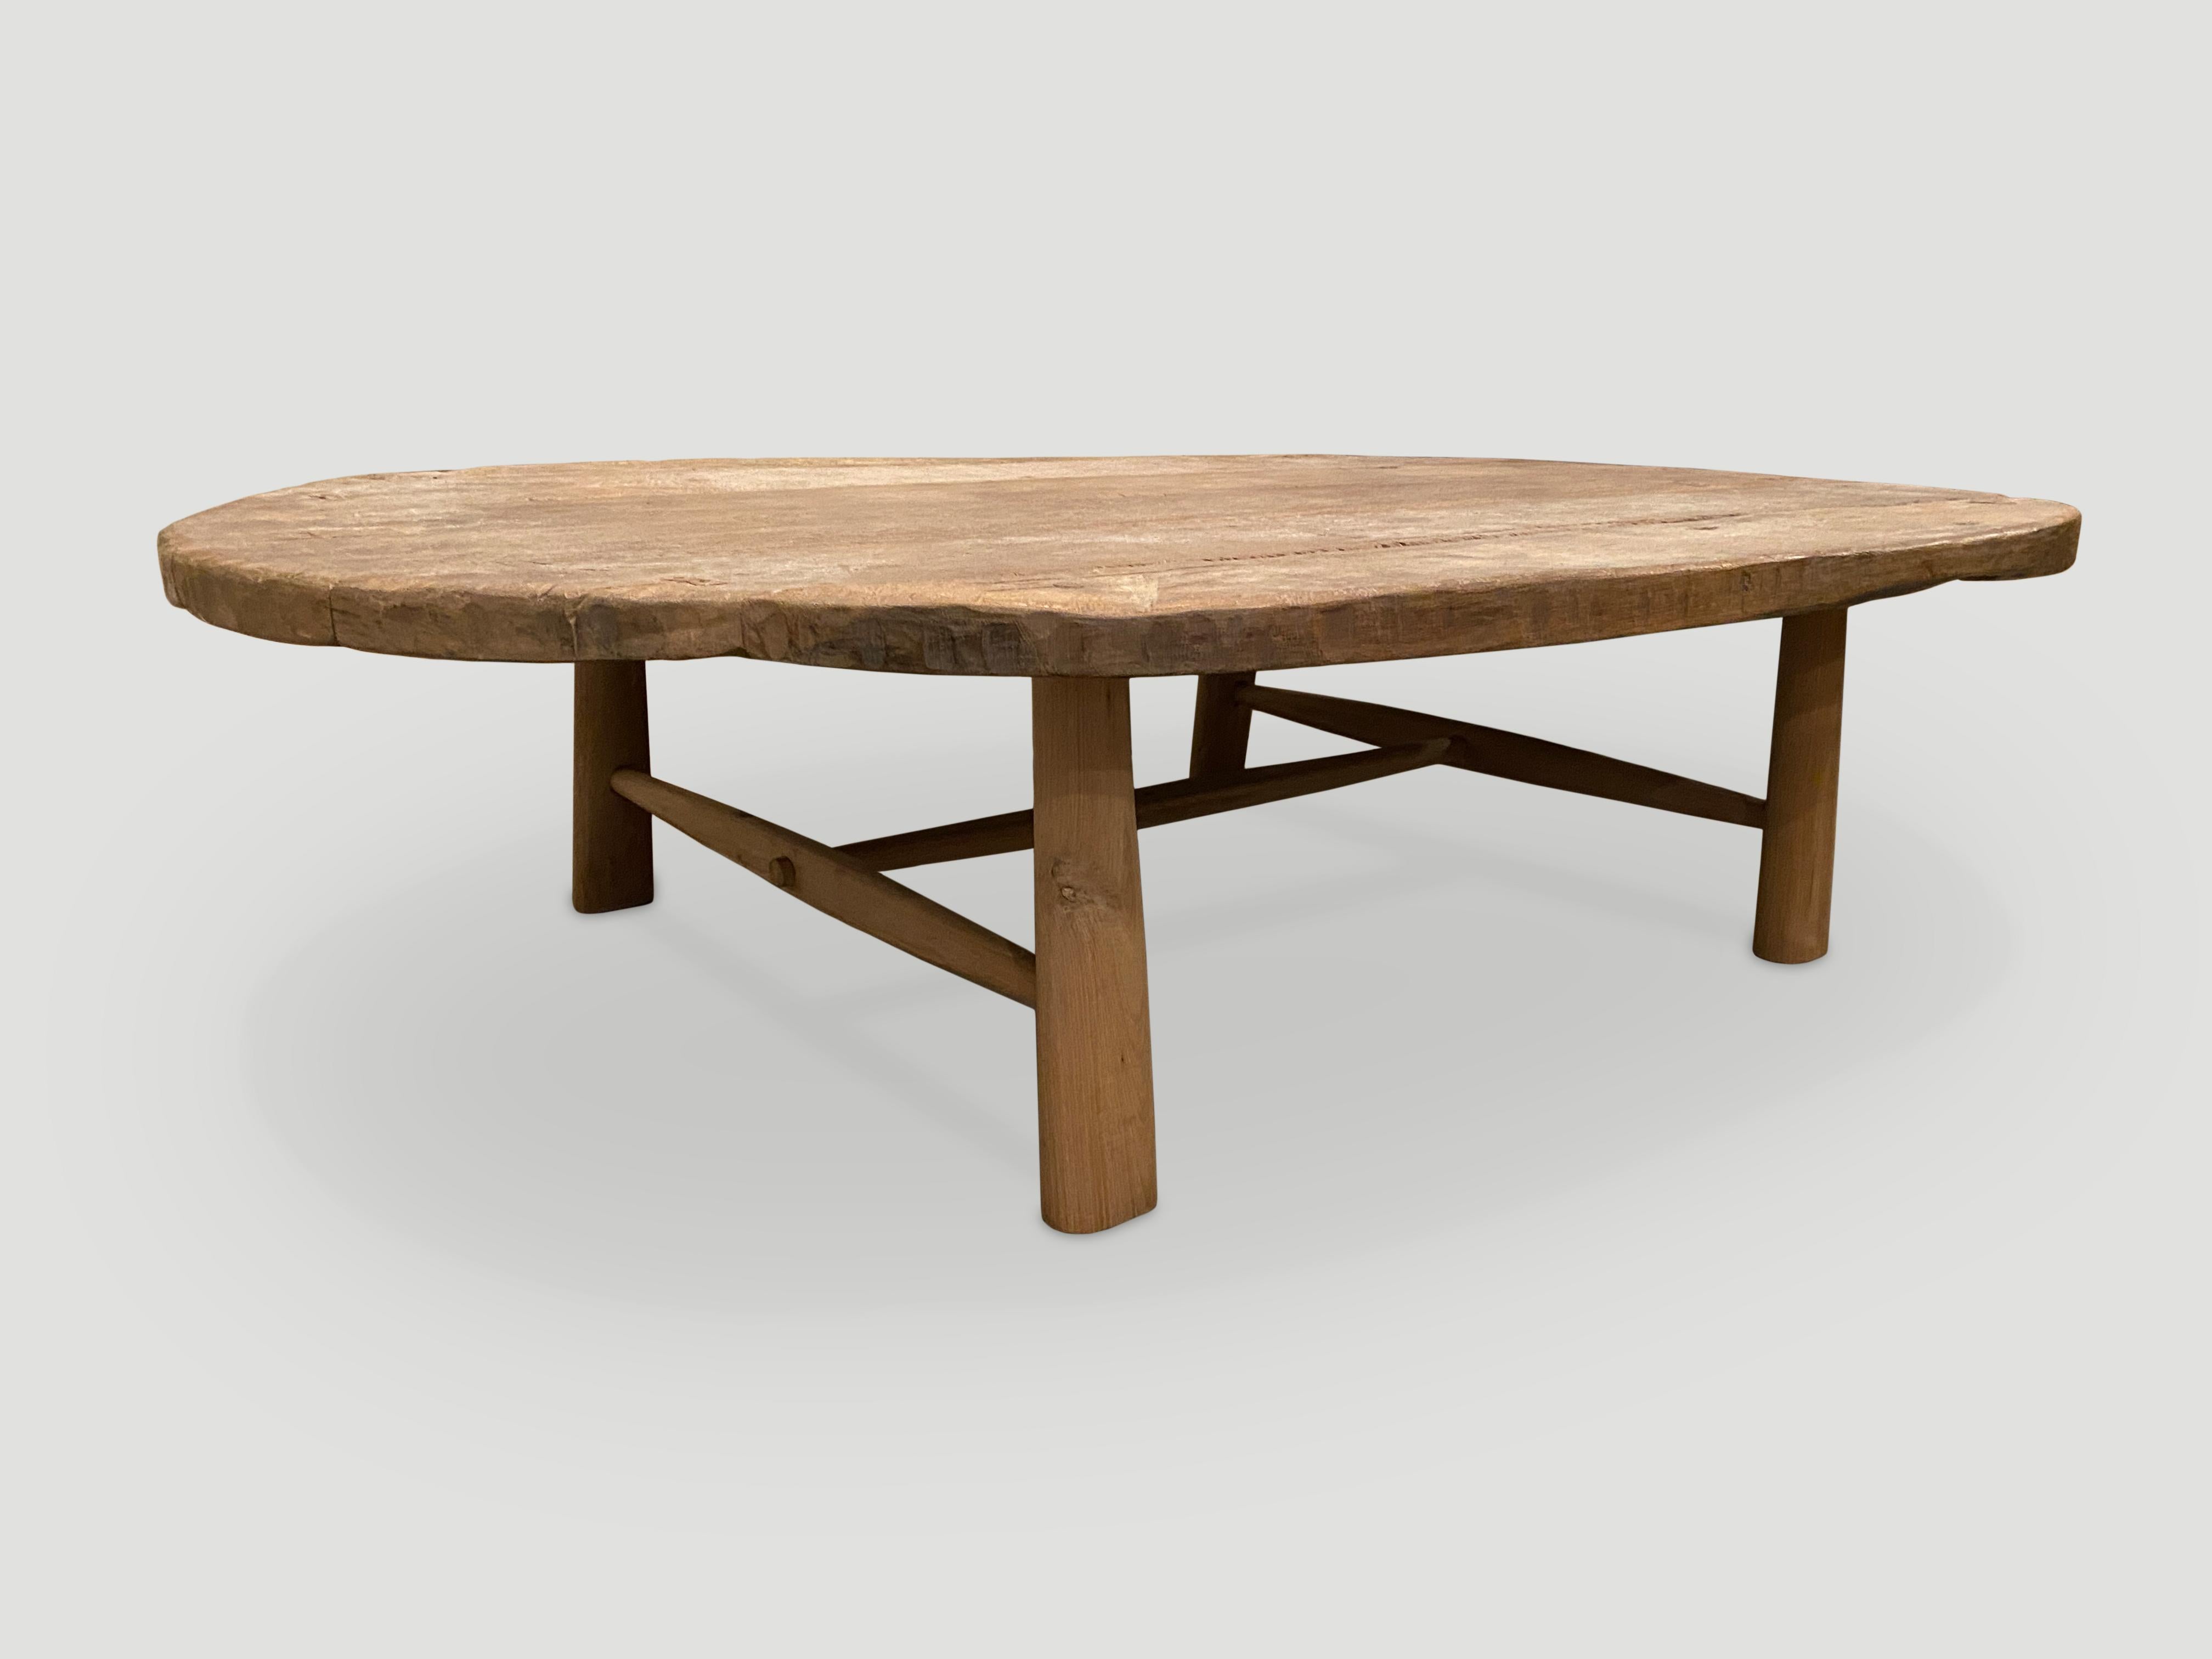 Andrianna Shamaris Wabi Sabi Teak Wood Oval Coffee Table In Excellent Condition For Sale In New York, NY